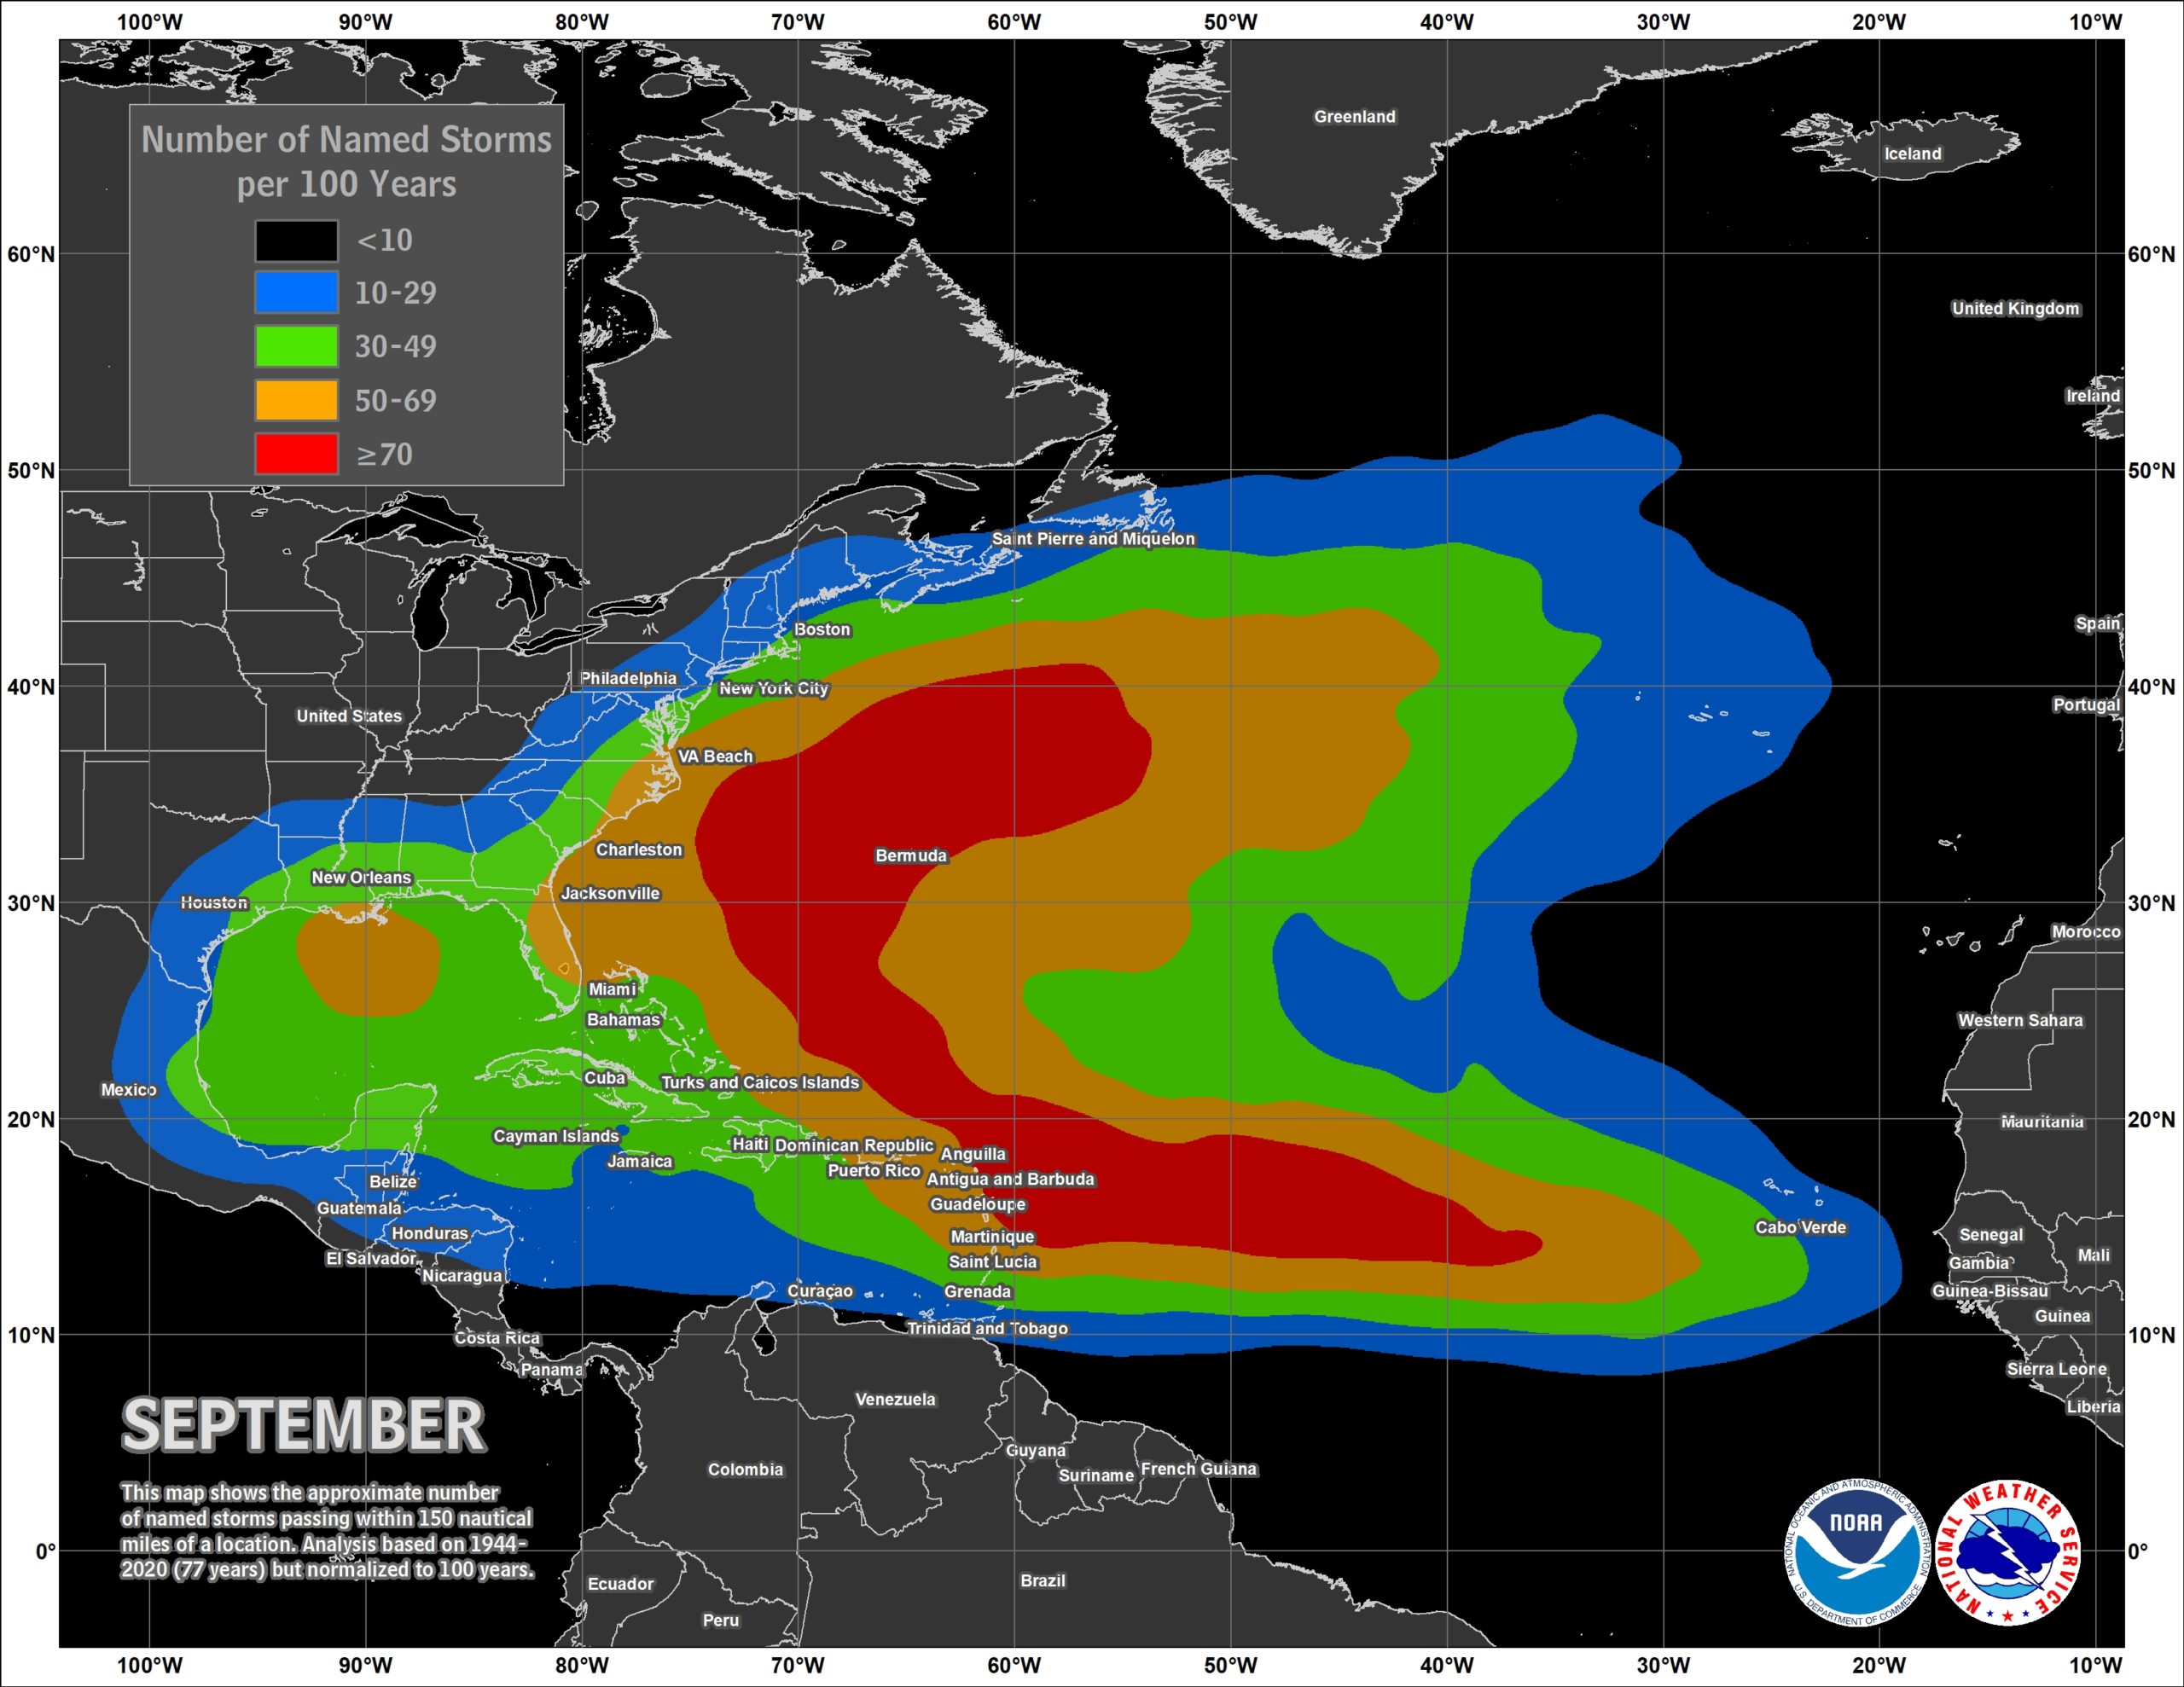 September is the peak of the hurricane season, and tropical storms and hurricanes can form and move about a broad area of the basin in a typical season. Image: NOAA